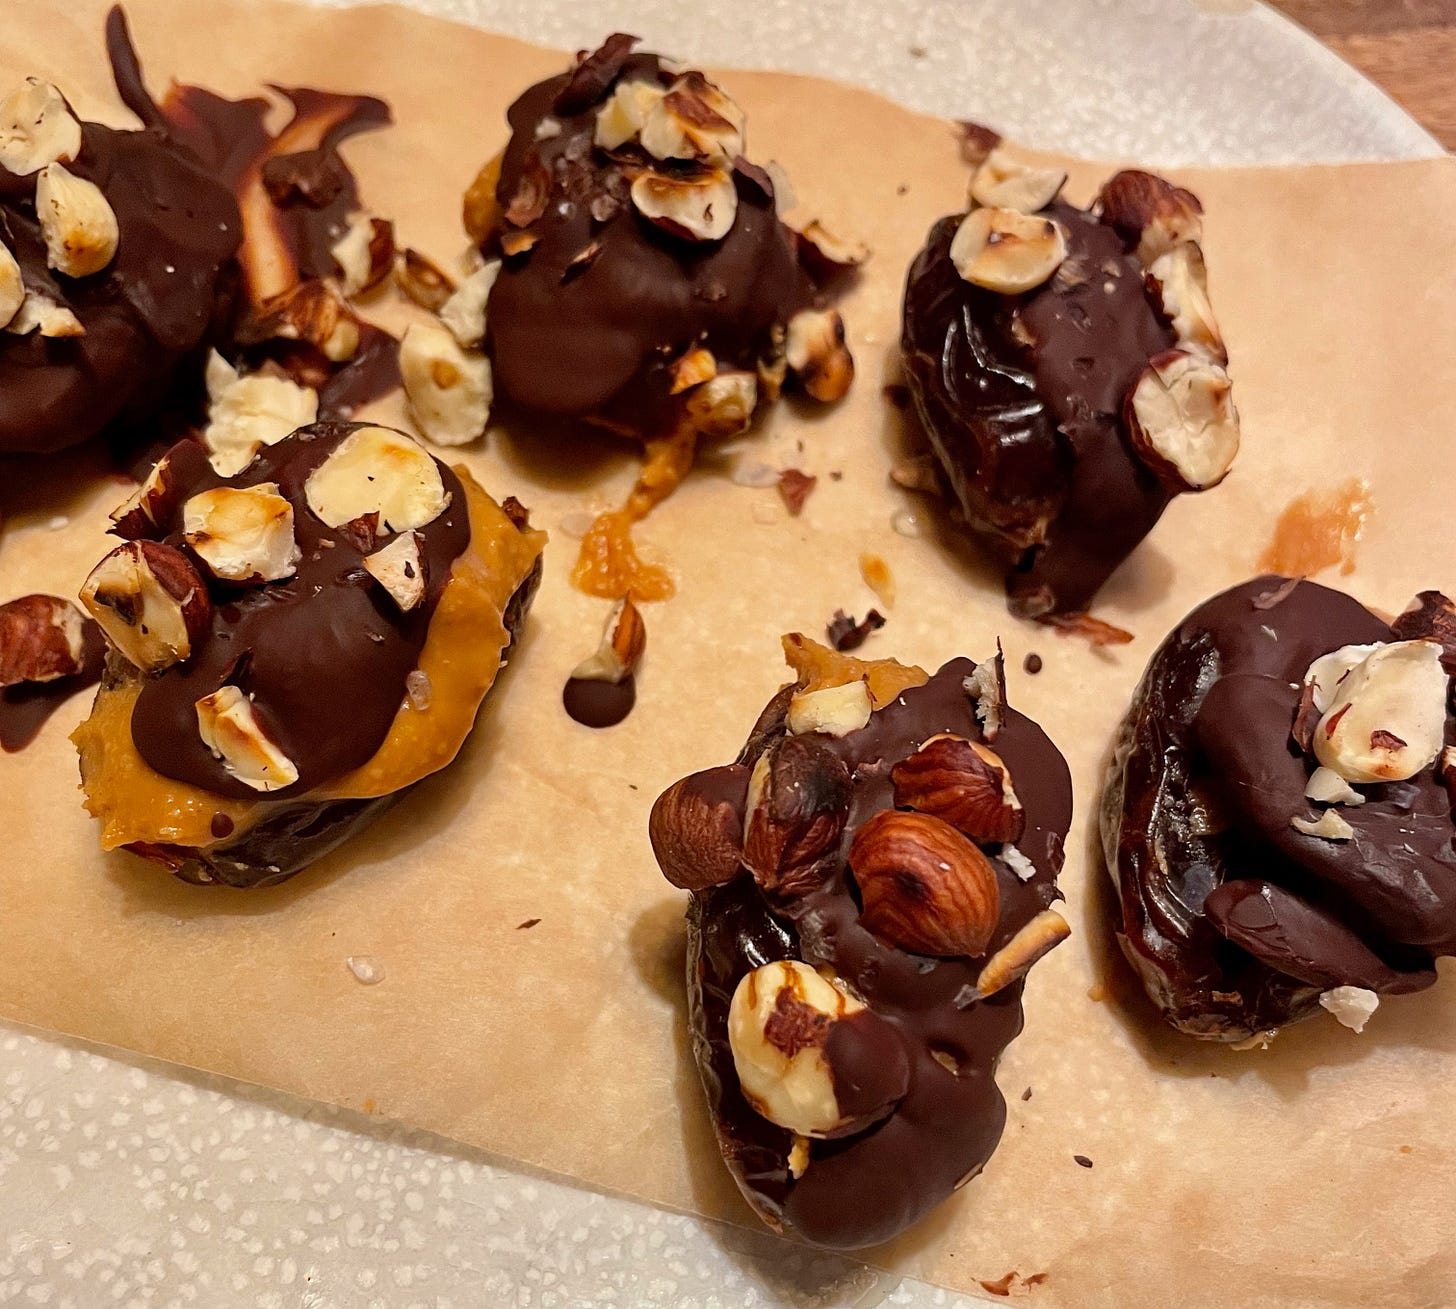 Dates covered in chocolate filled with peanut butter